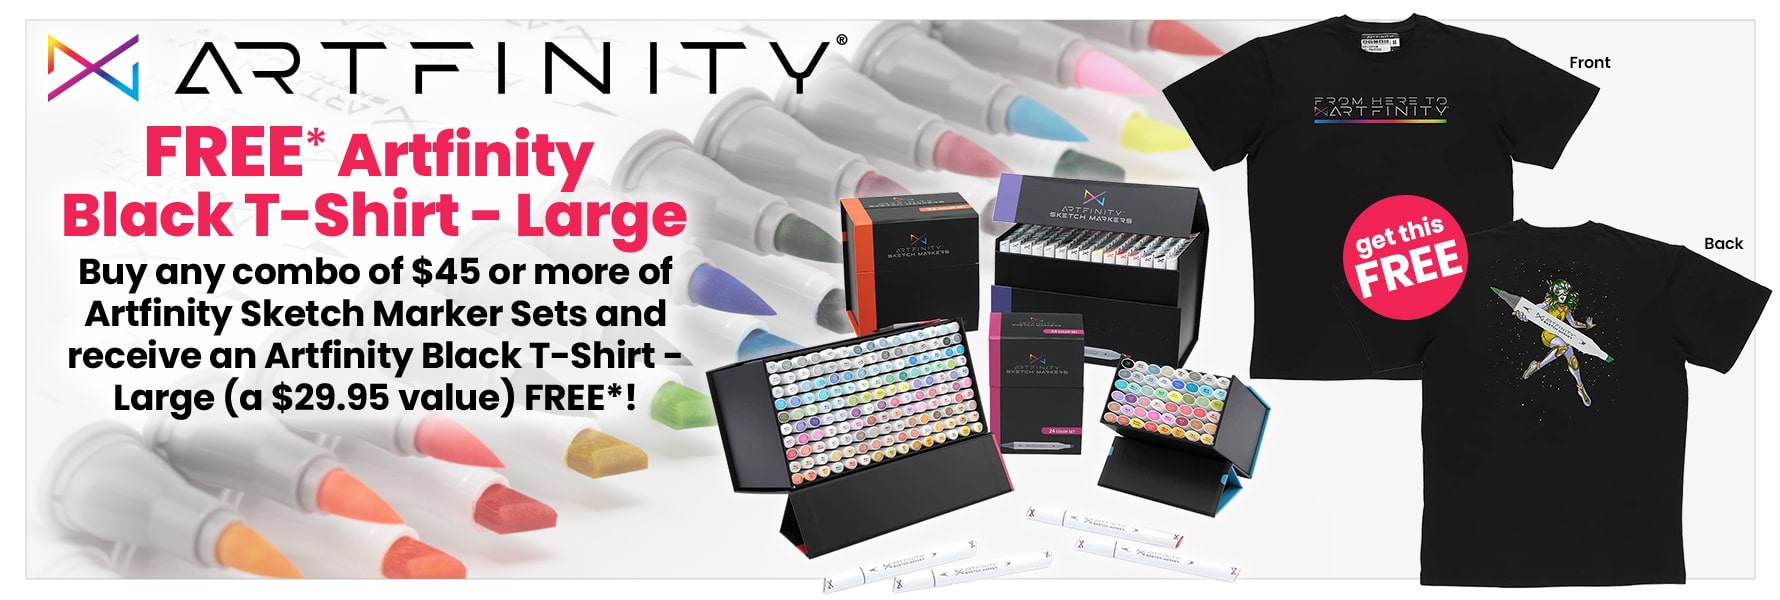 FREE OFFER with purchase of Artfinity Sketch Markers & Sets